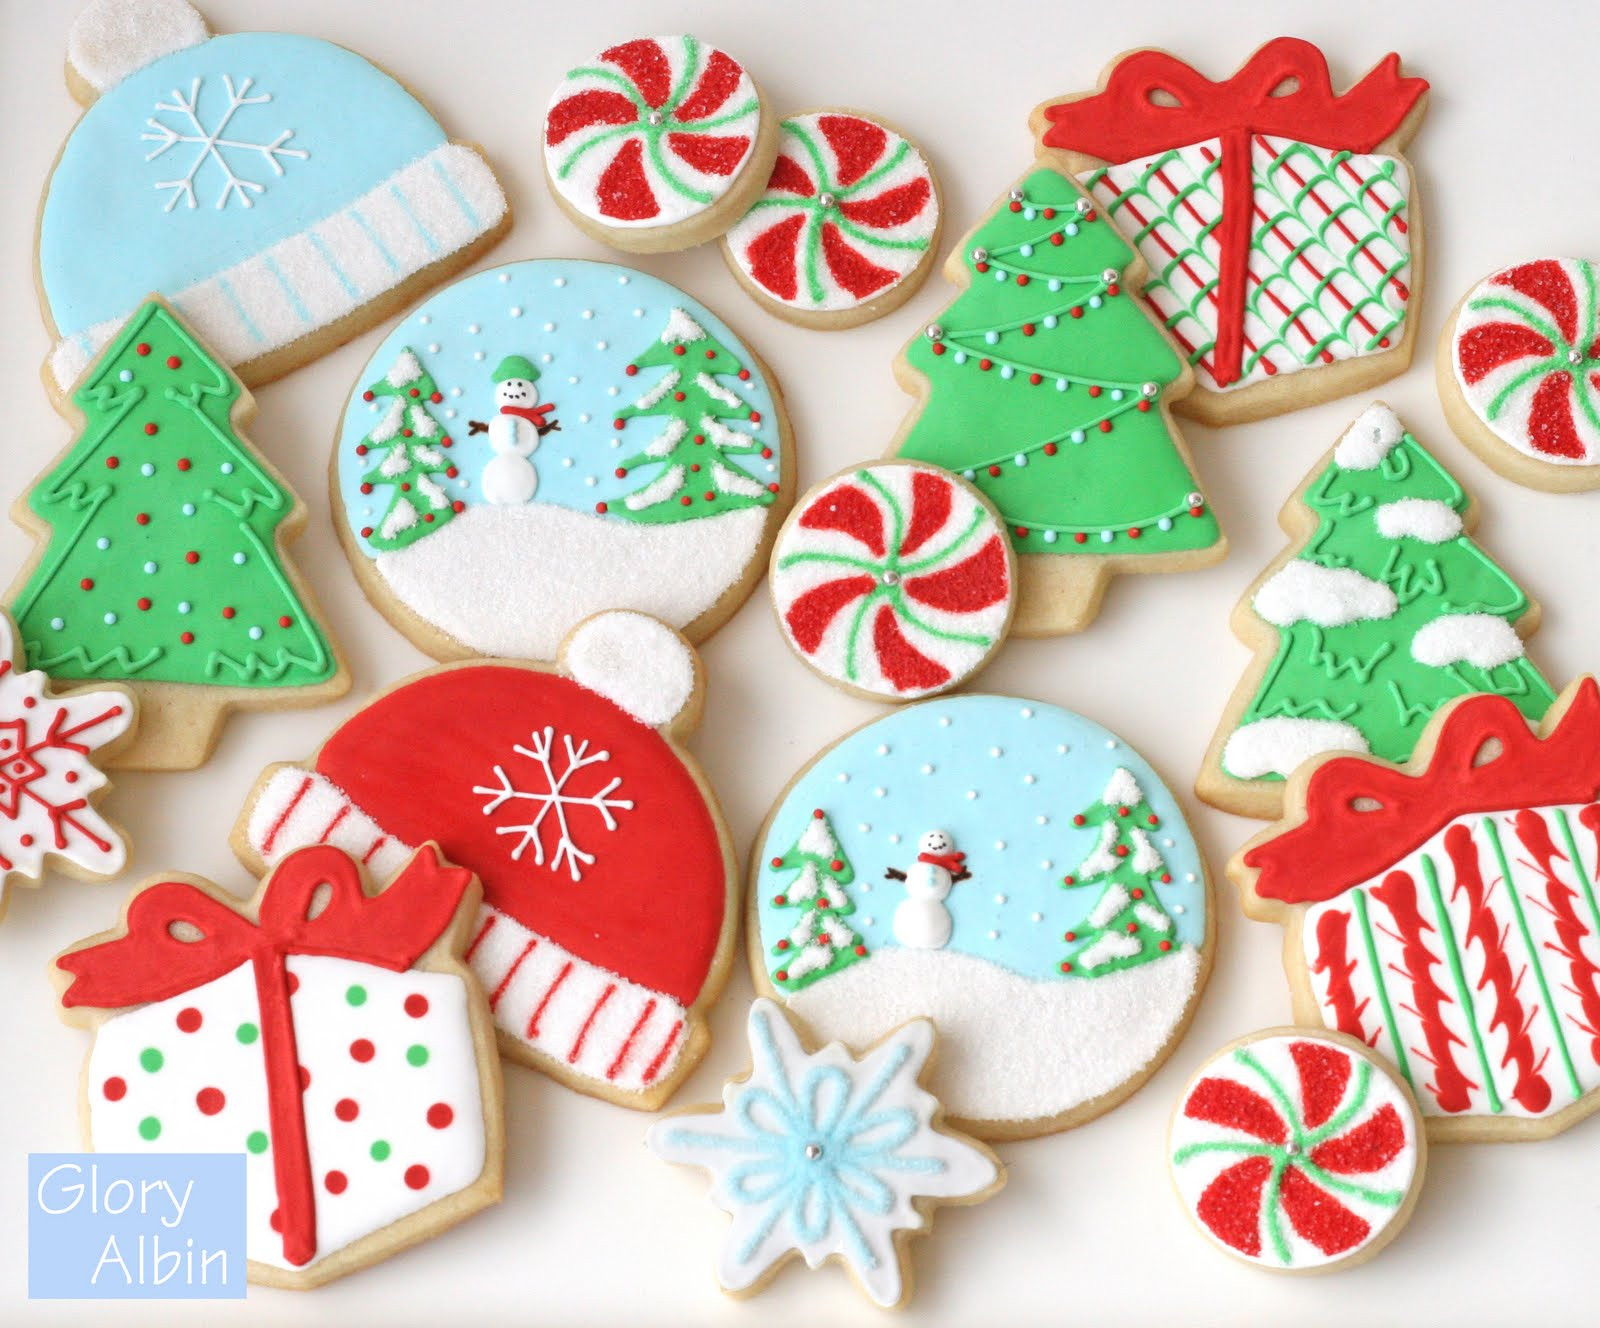 Sugar Cookies For Decorating
 Decorating Sugar Cookies with Royal Icing – Glorious Treats